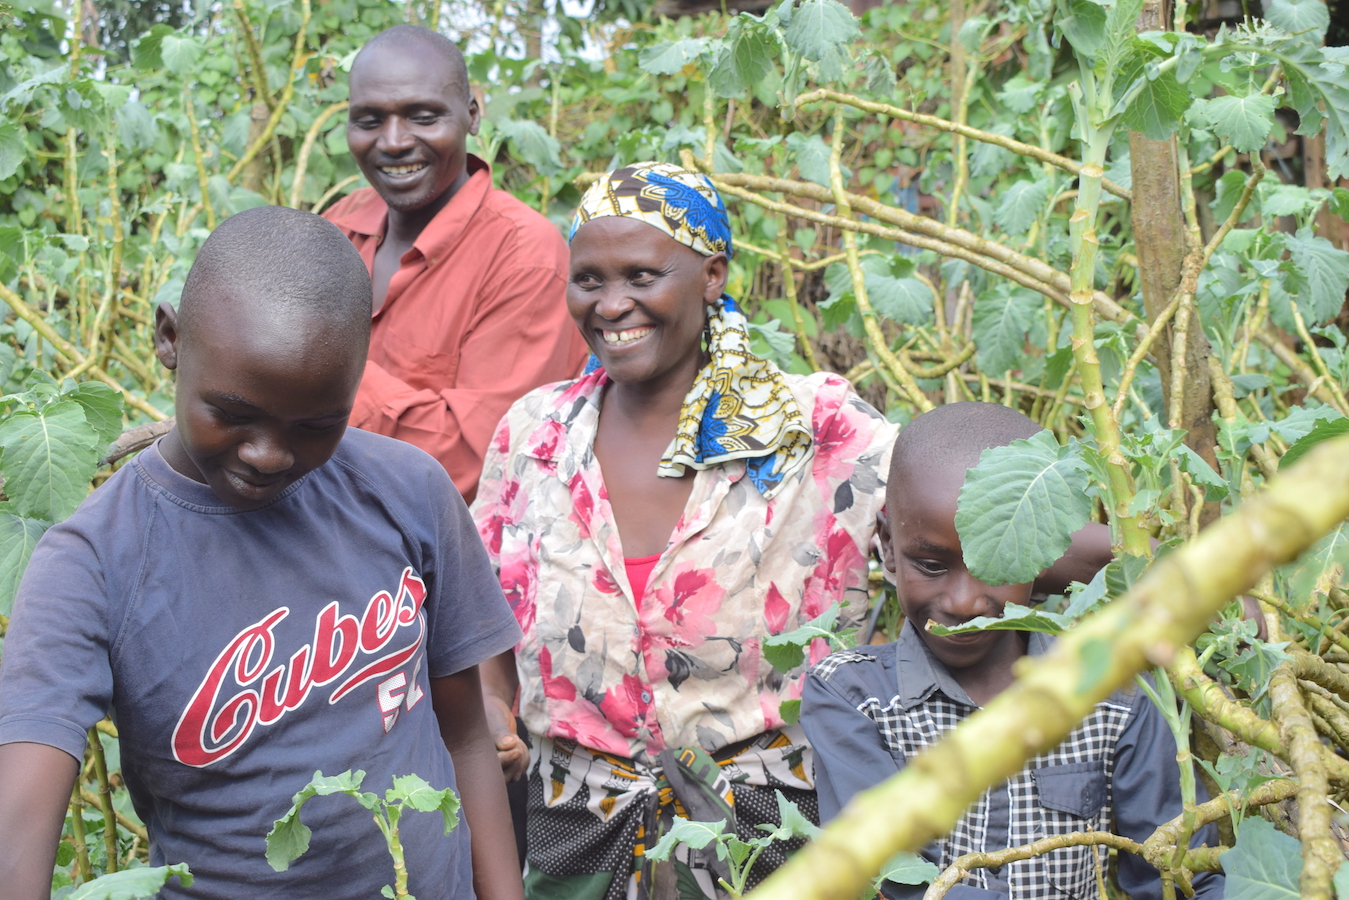 Evans, Joyce and their children - Abgael (15) and Gideon (13) at their kitchen garden in Nyamusi, Kenya. The vegetables enable them to boost food security and household income.